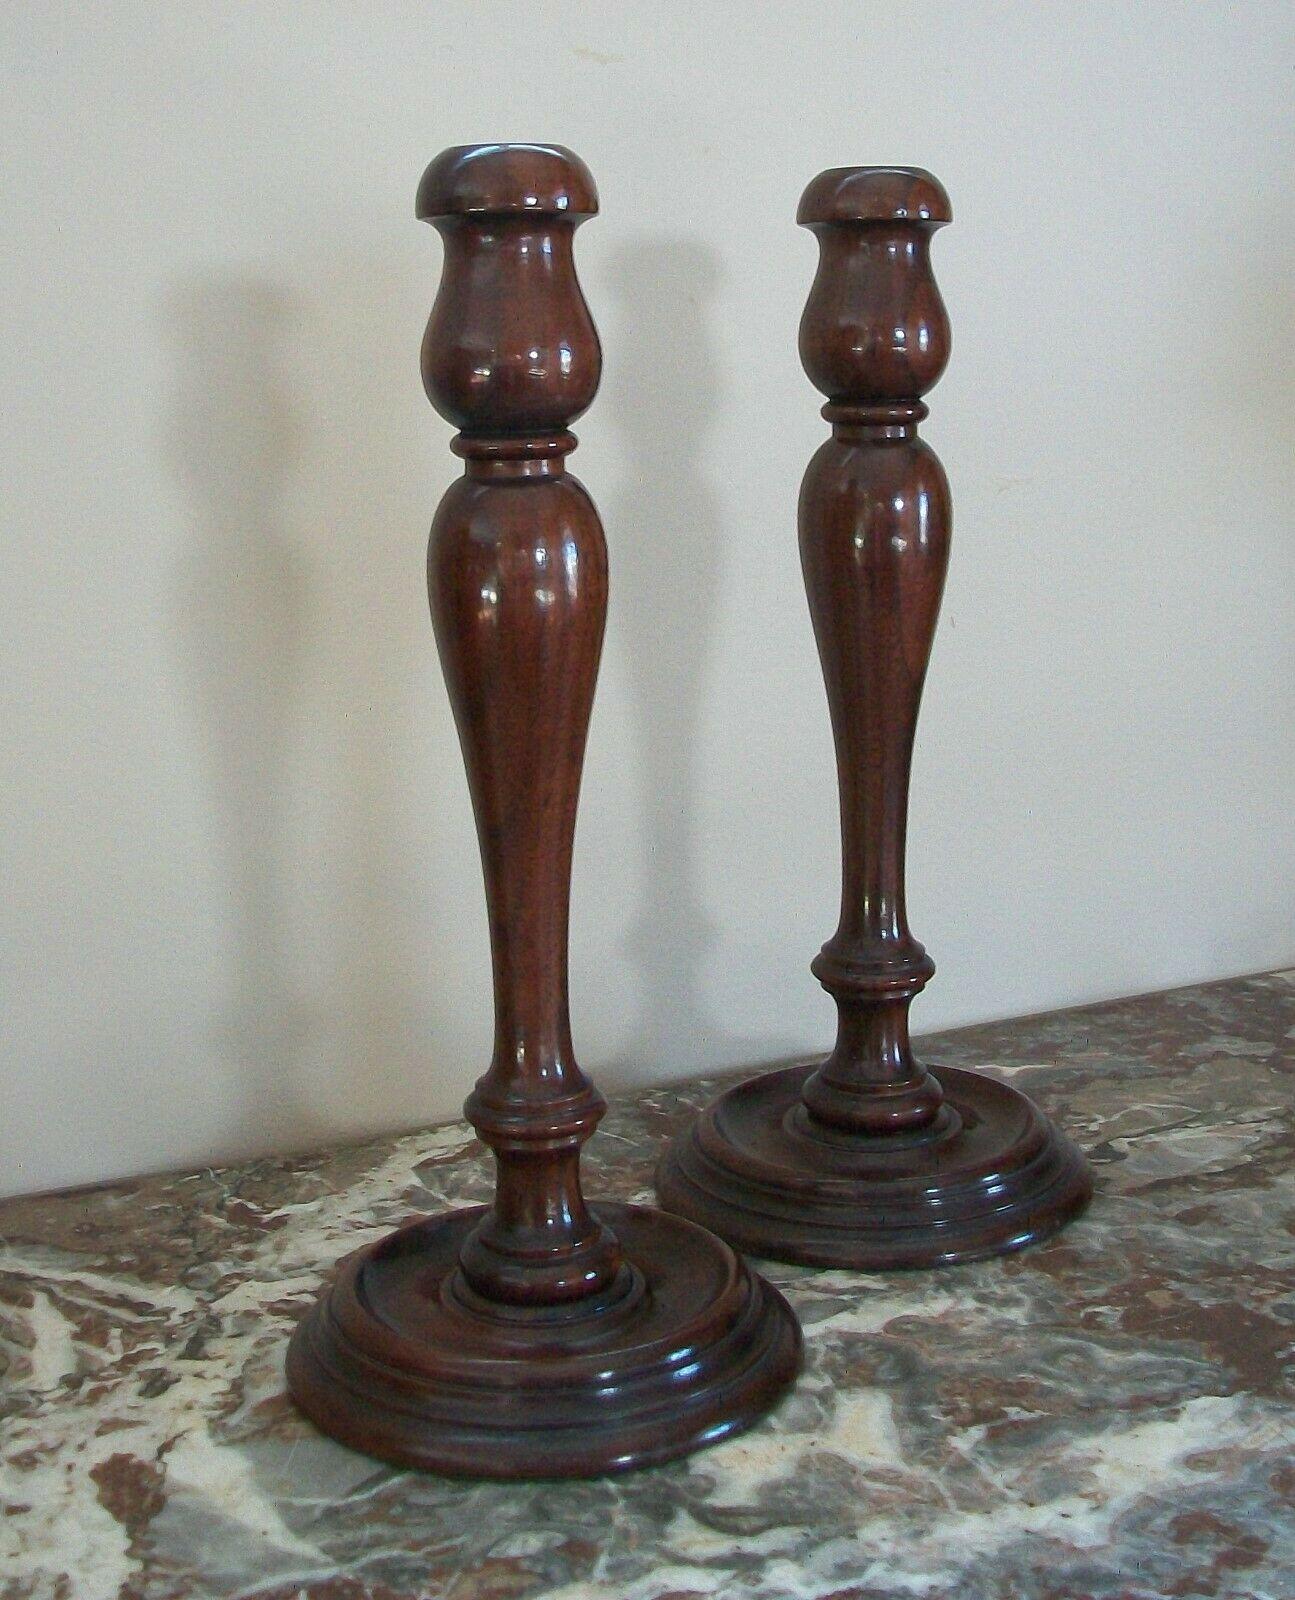 American Classical Antique Large Pair of Hardwood Candlesticks - Rich Patina - U.S.A., C.1900 For Sale